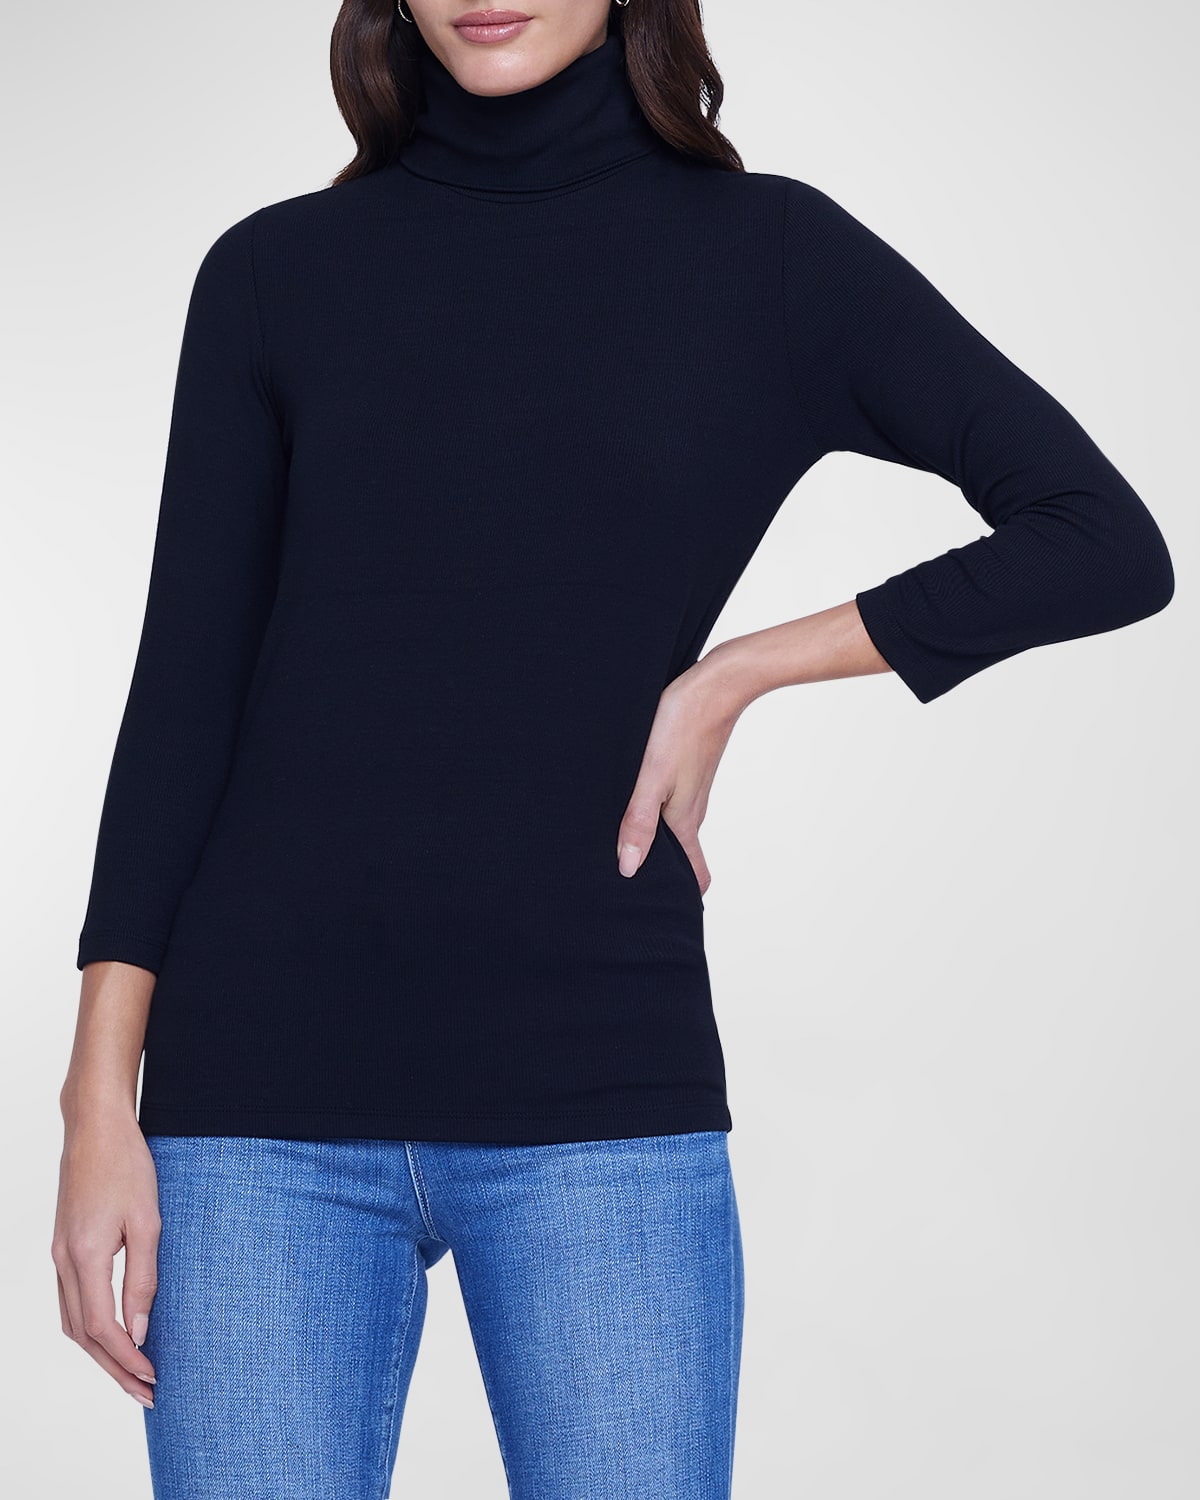 L'Agence Reeves Ribbed Button-Detail Turtleneck | Neiman Marcus